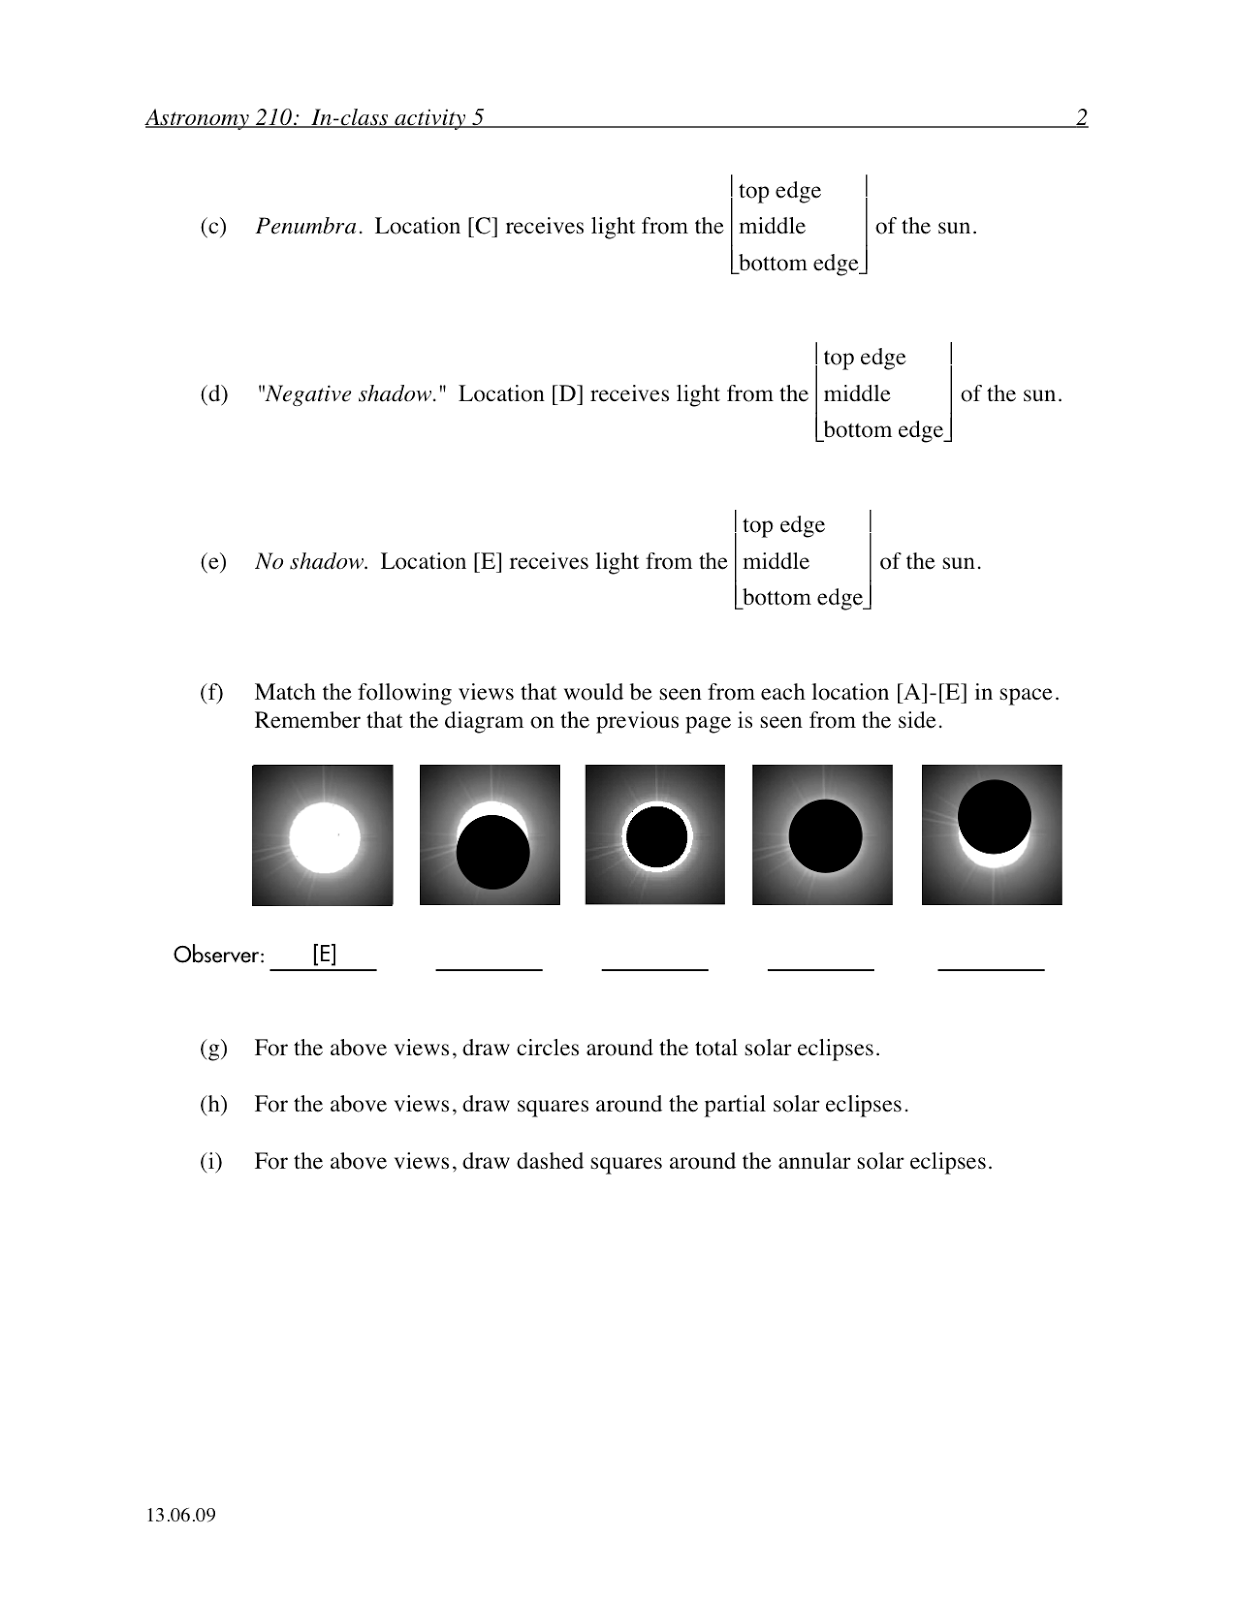 P-dog's blog: boring but important: Astronomy in-class activity: eclipses